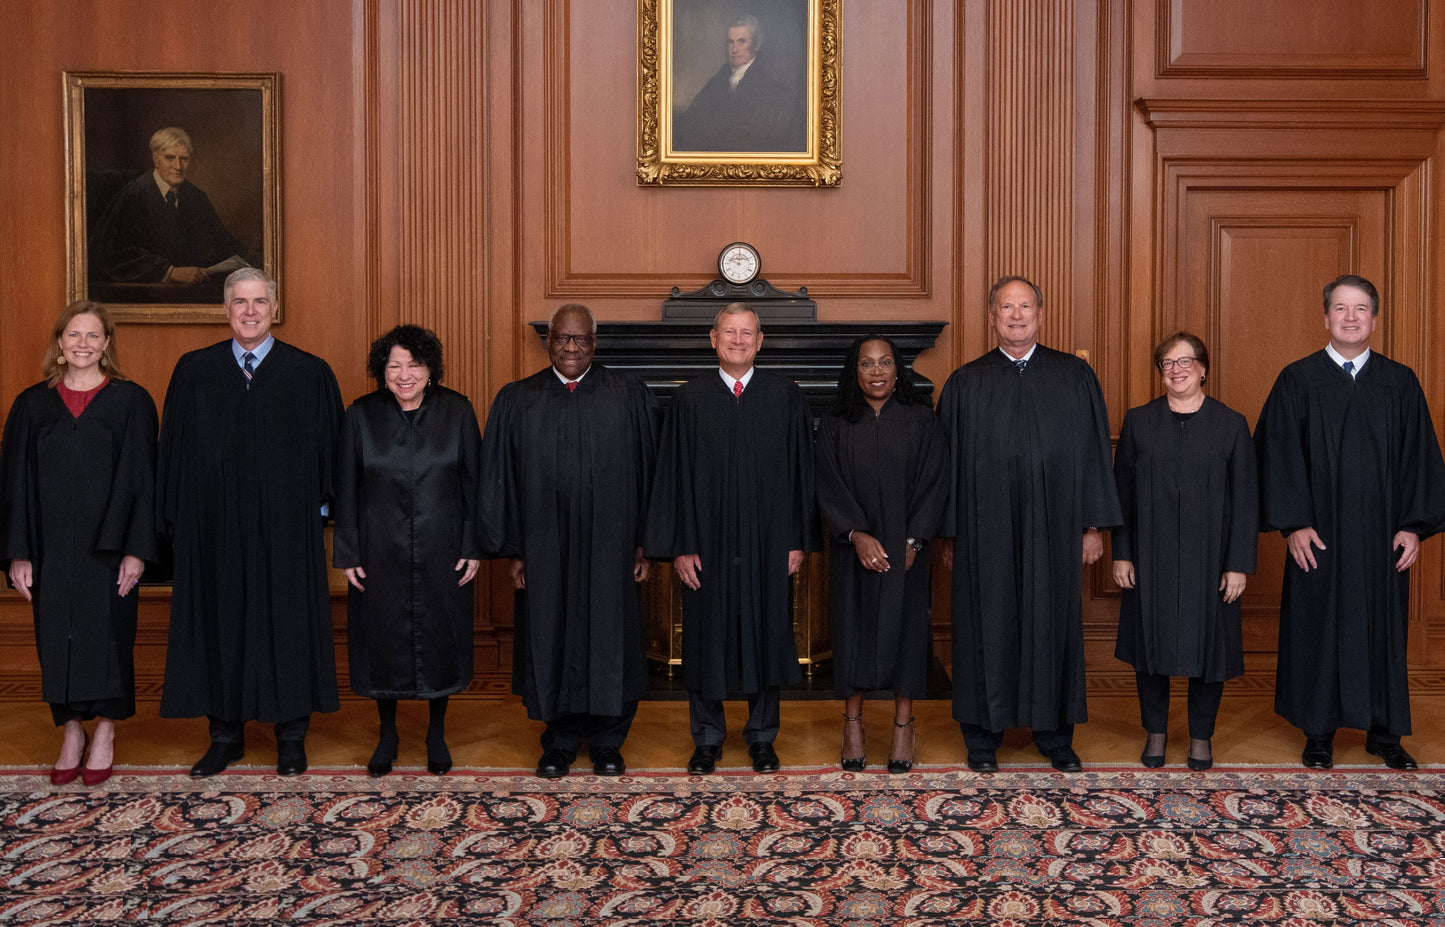 SUPREME COURT JUSTICES JUDGES GLOSSY POSTER PICTURE PHOTO PRINT BANNER 2022